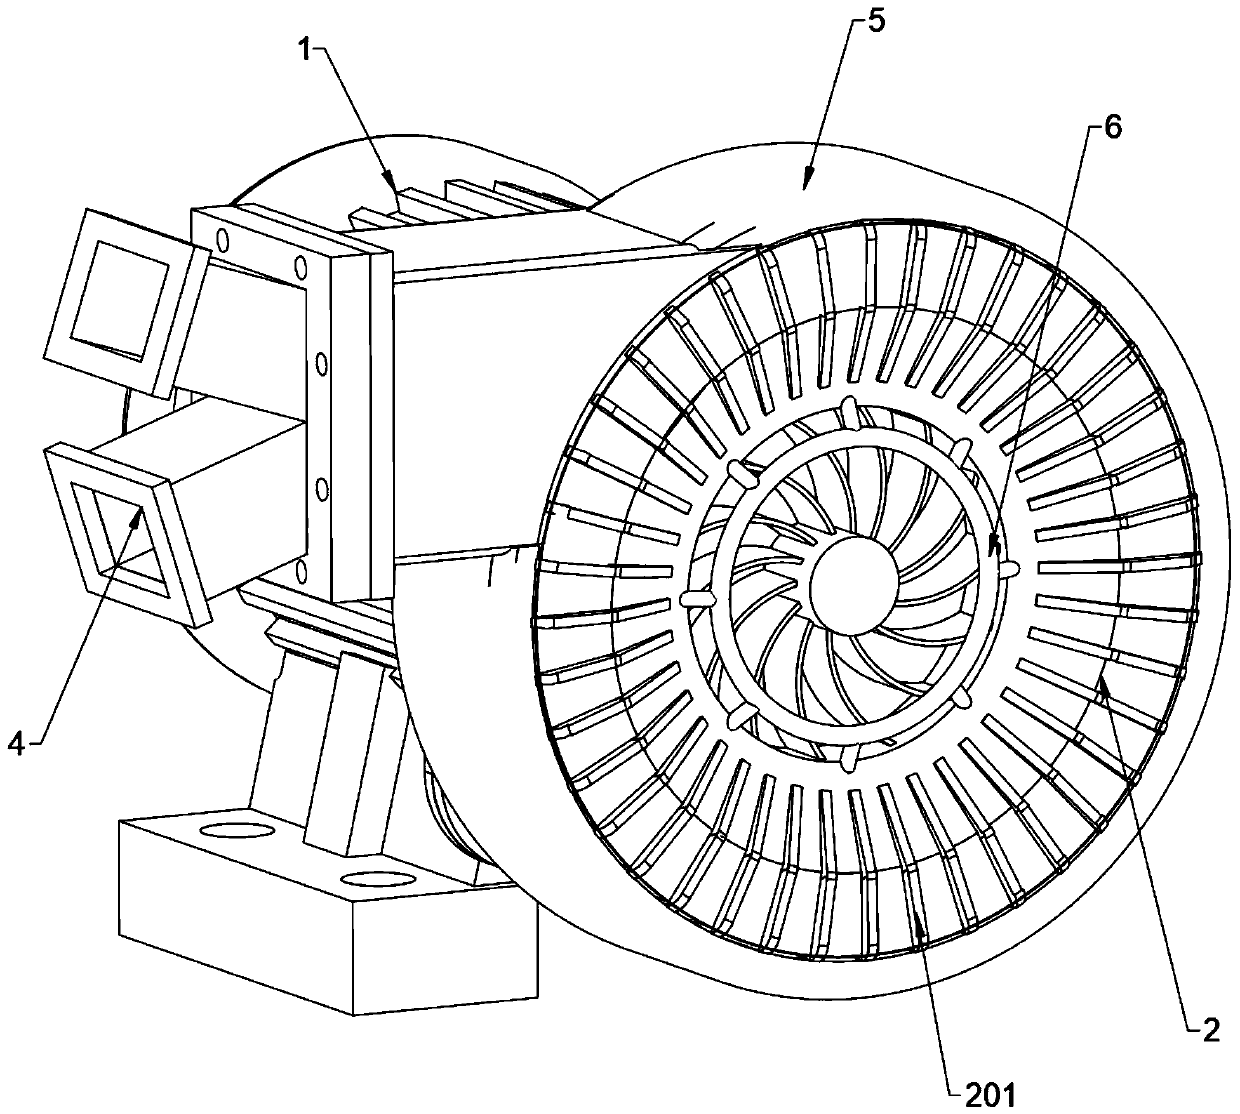 Blower capable of conducting self-physical cooling